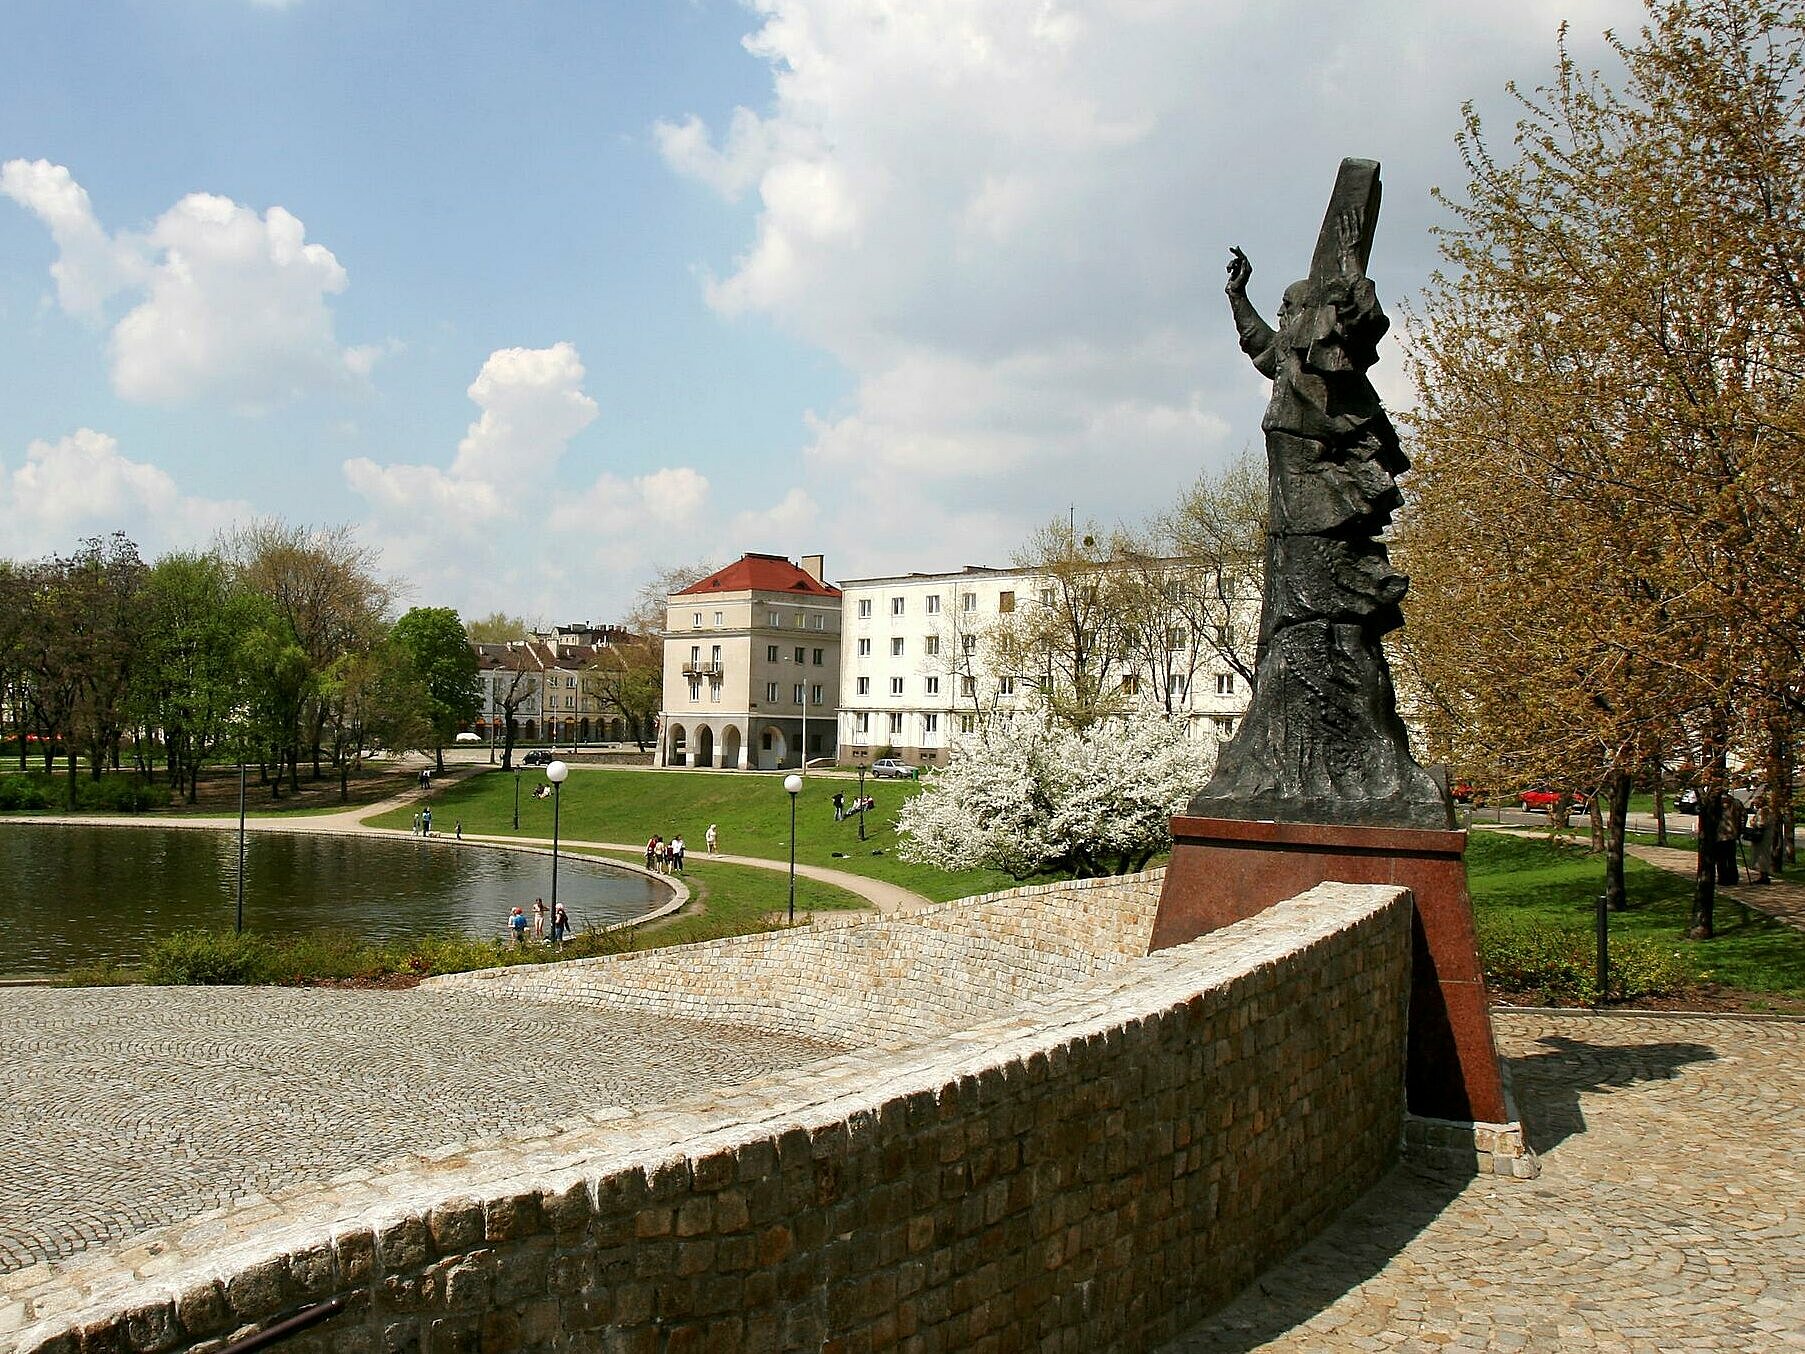 Decalogue monument in Old Town Park , A. Wach